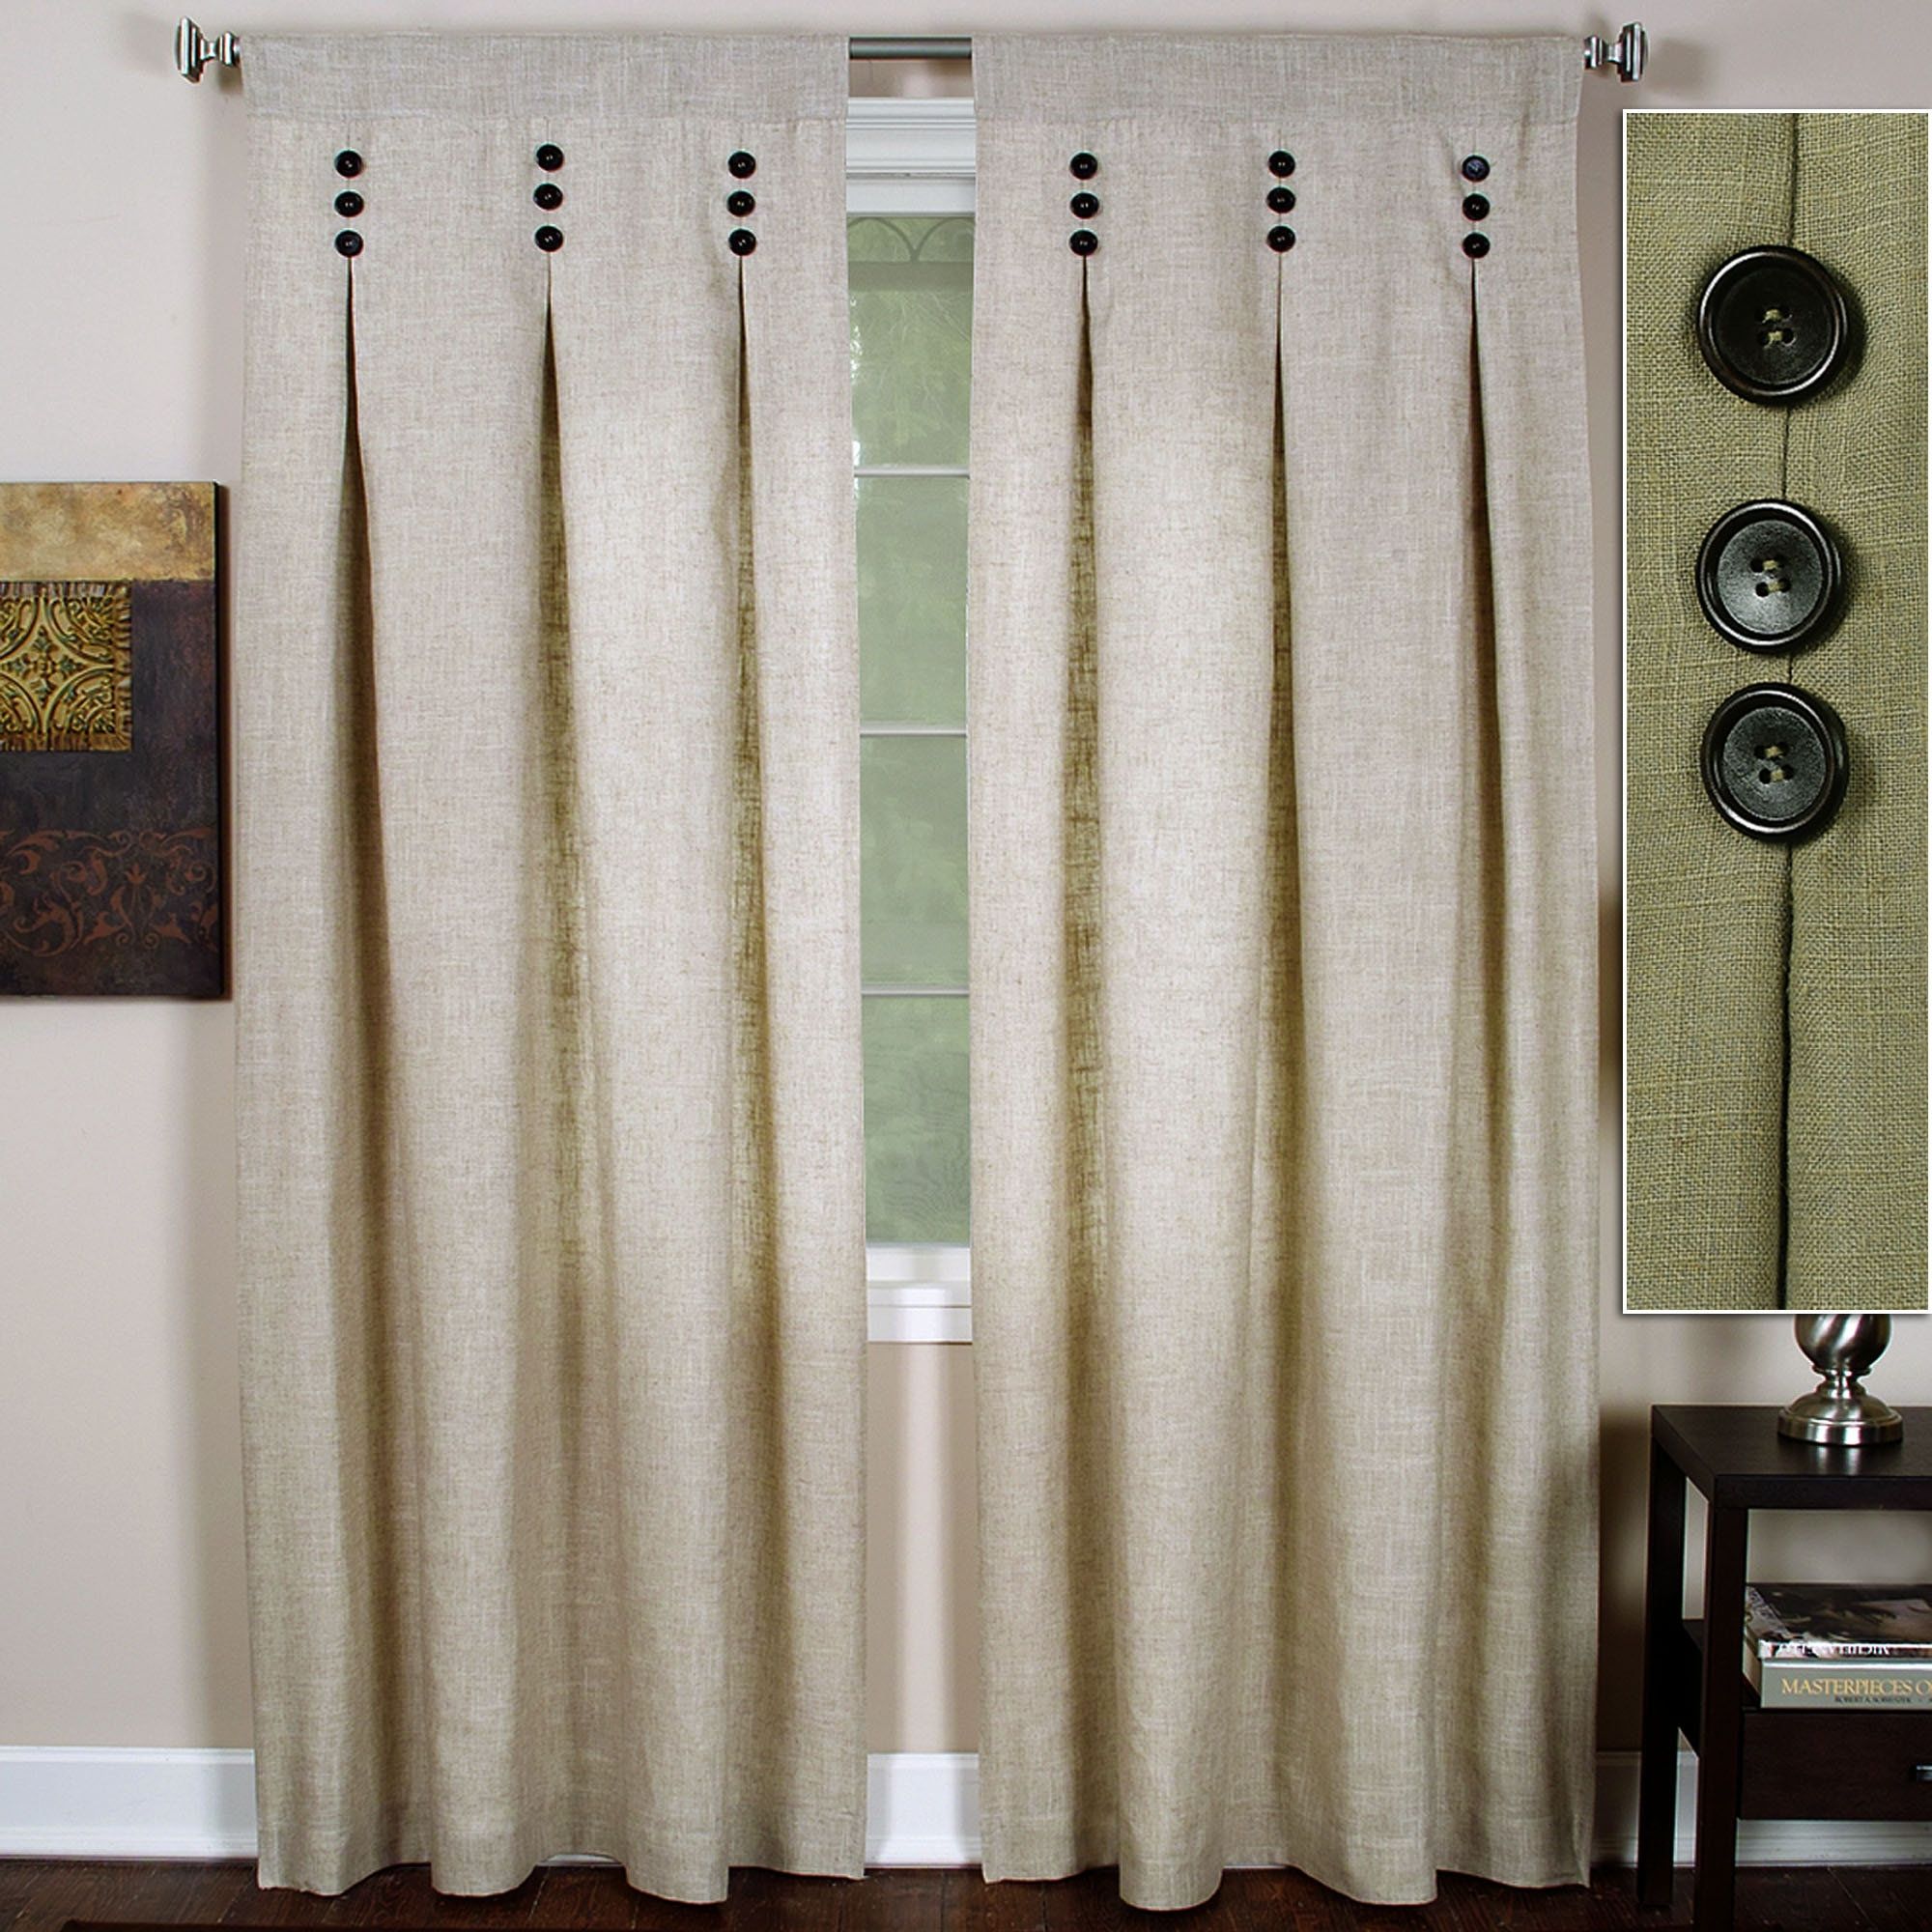 Memorable Figure Blossoming Curtains Valances Swags Unusual Kindly Regarding 63 Inches Long Curtains (View 16 of 25)